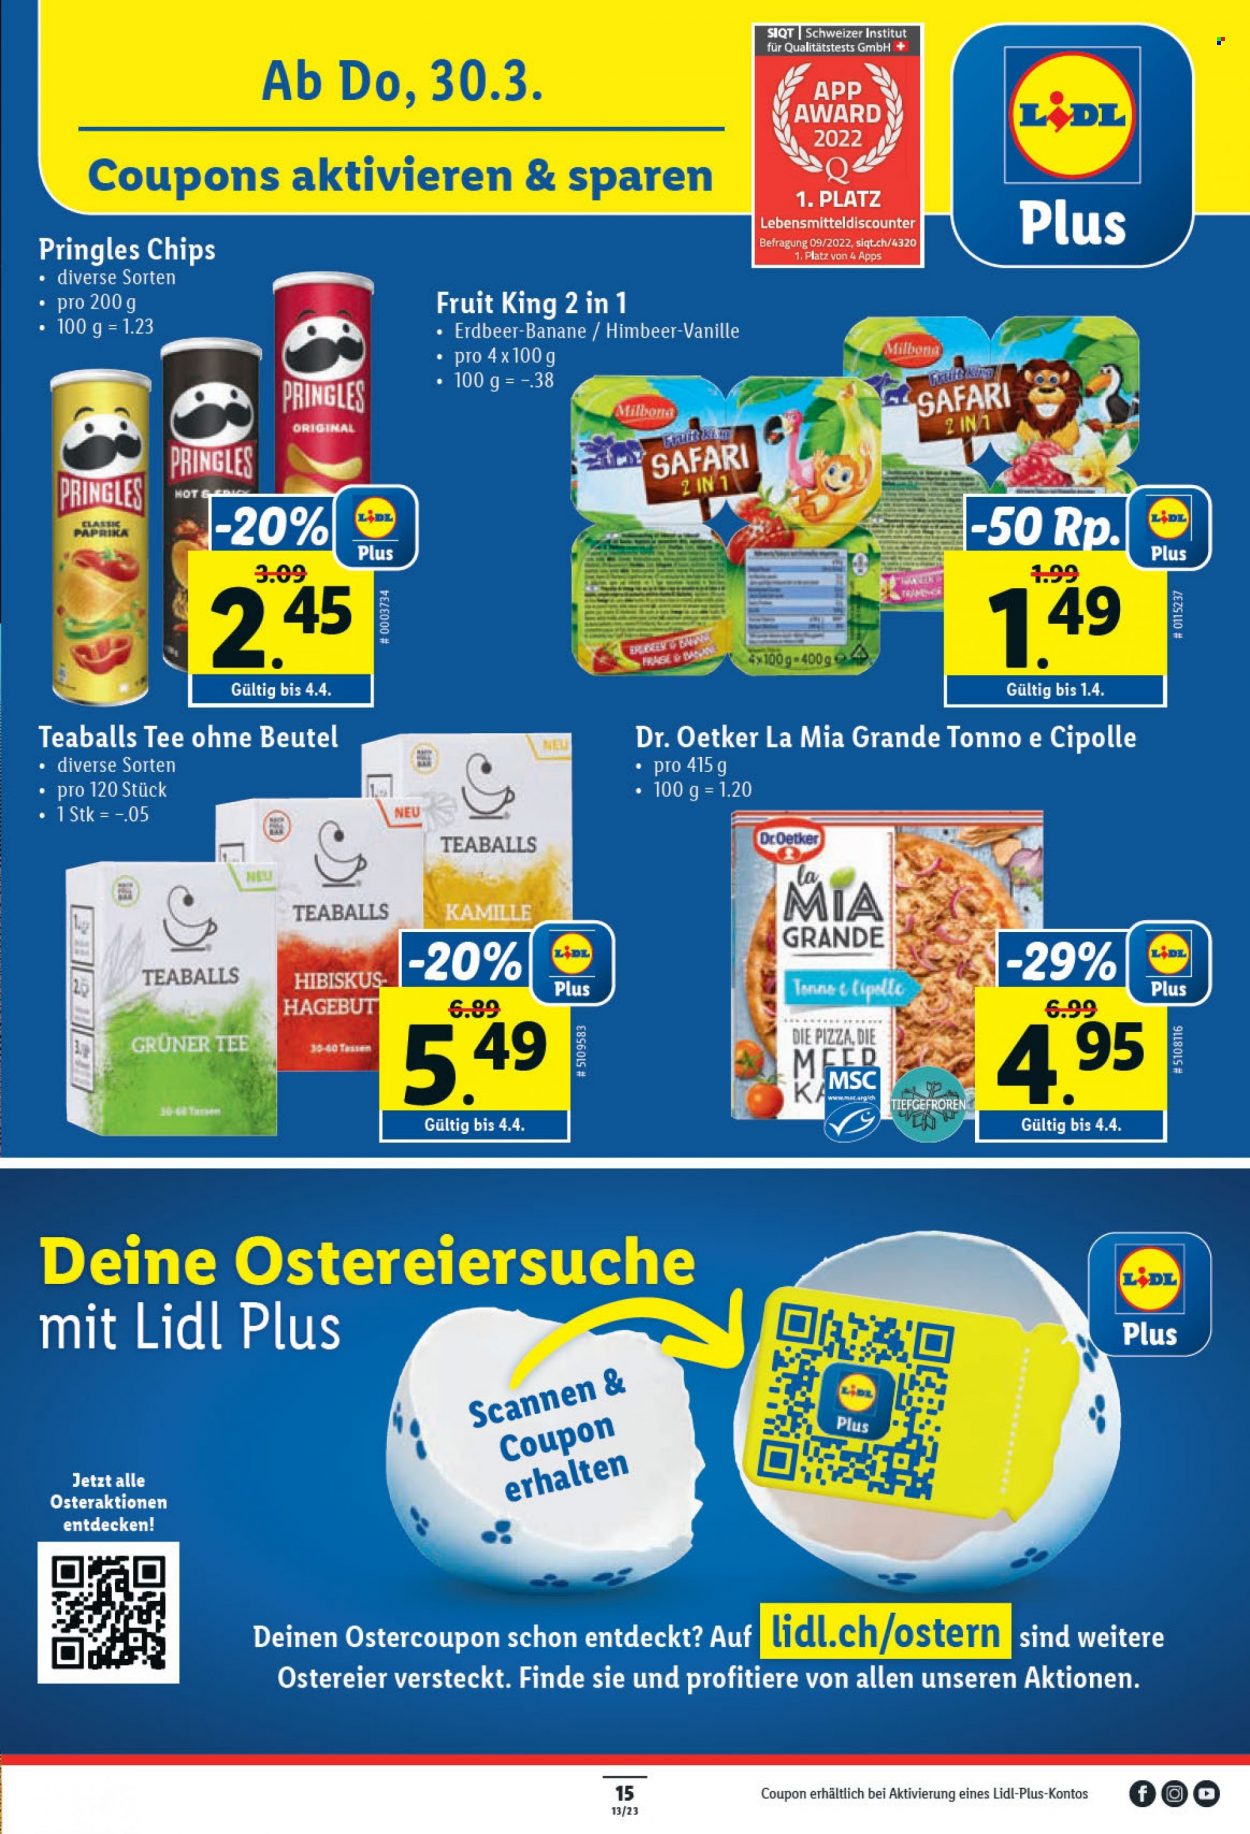 Catalogue Lidl - 30.3.2023 - 4.4.2023. Page 15.